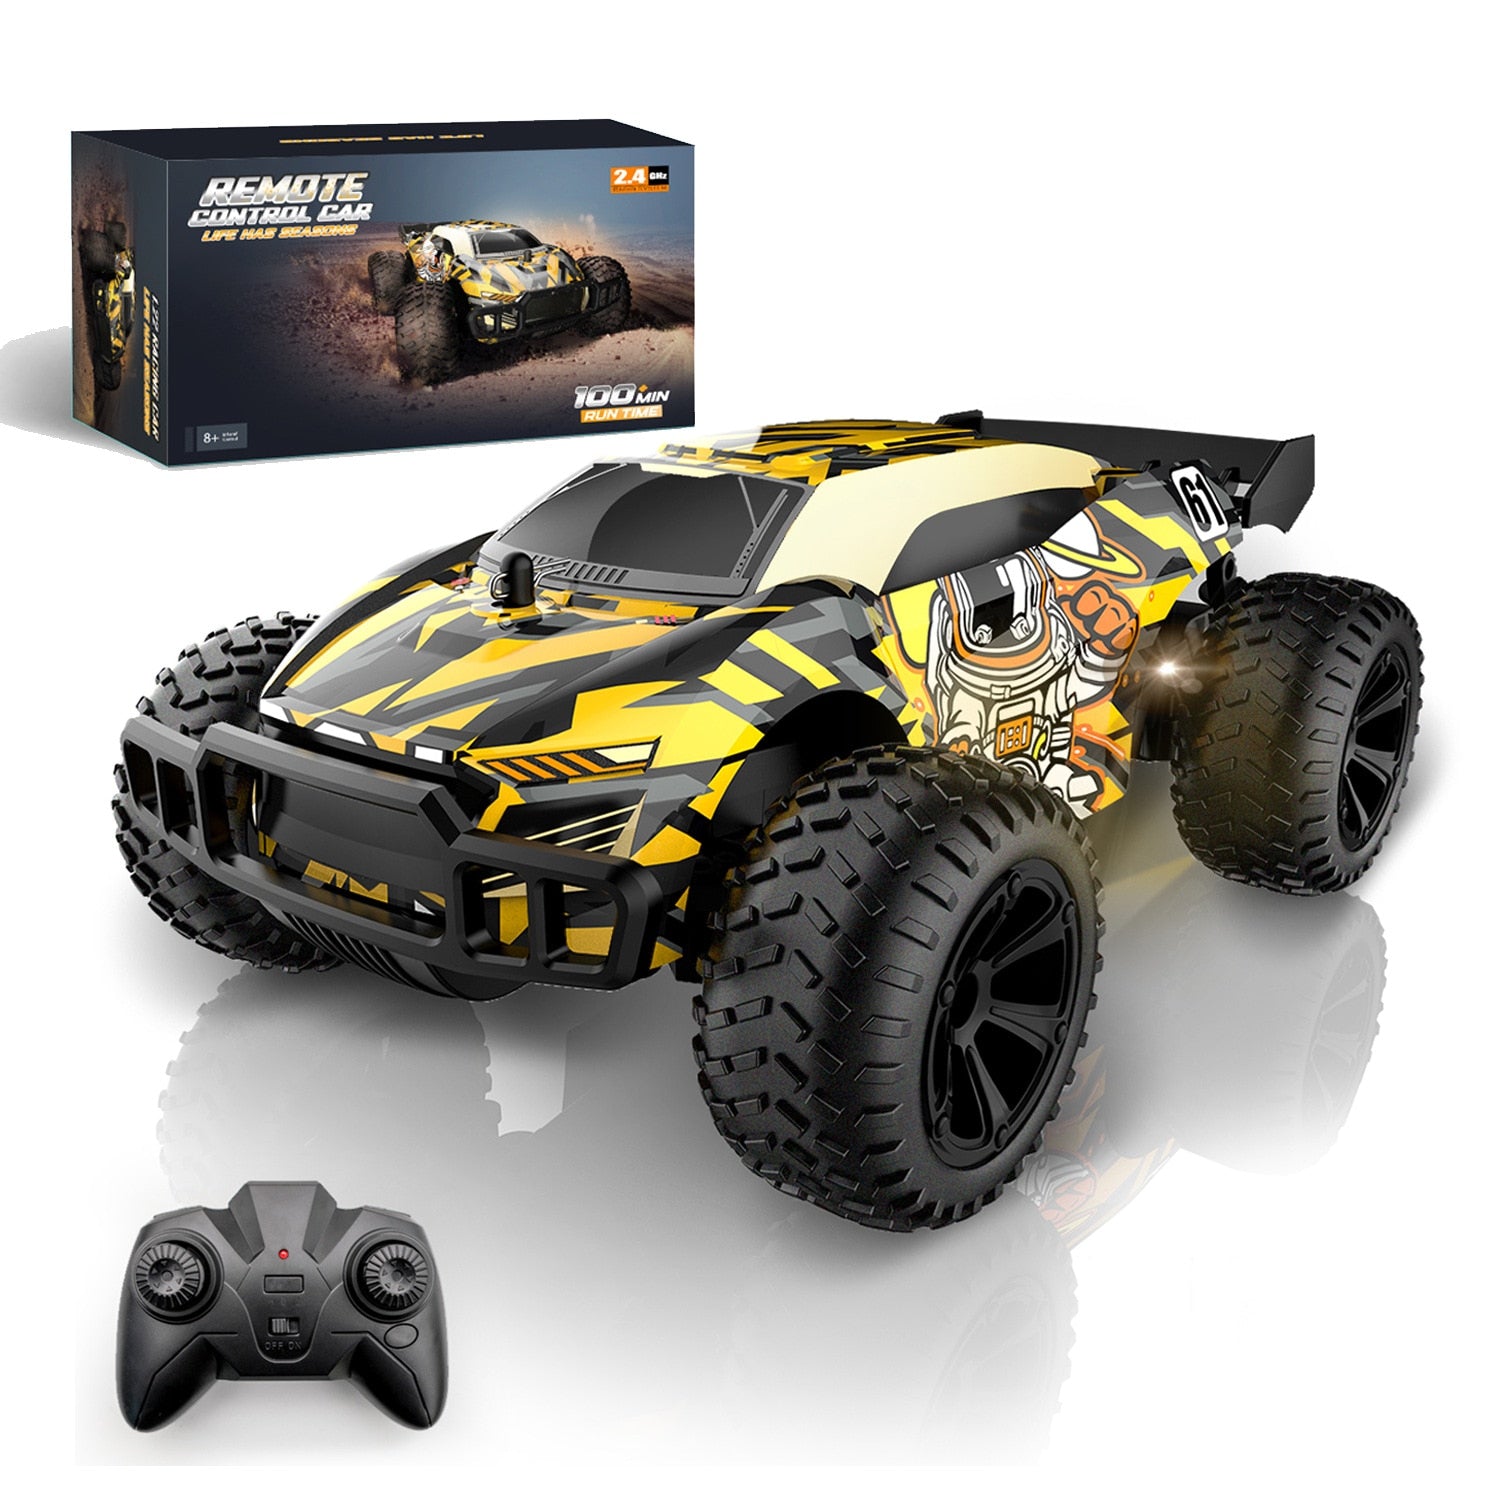 Remote Control Off-road High-speed Car